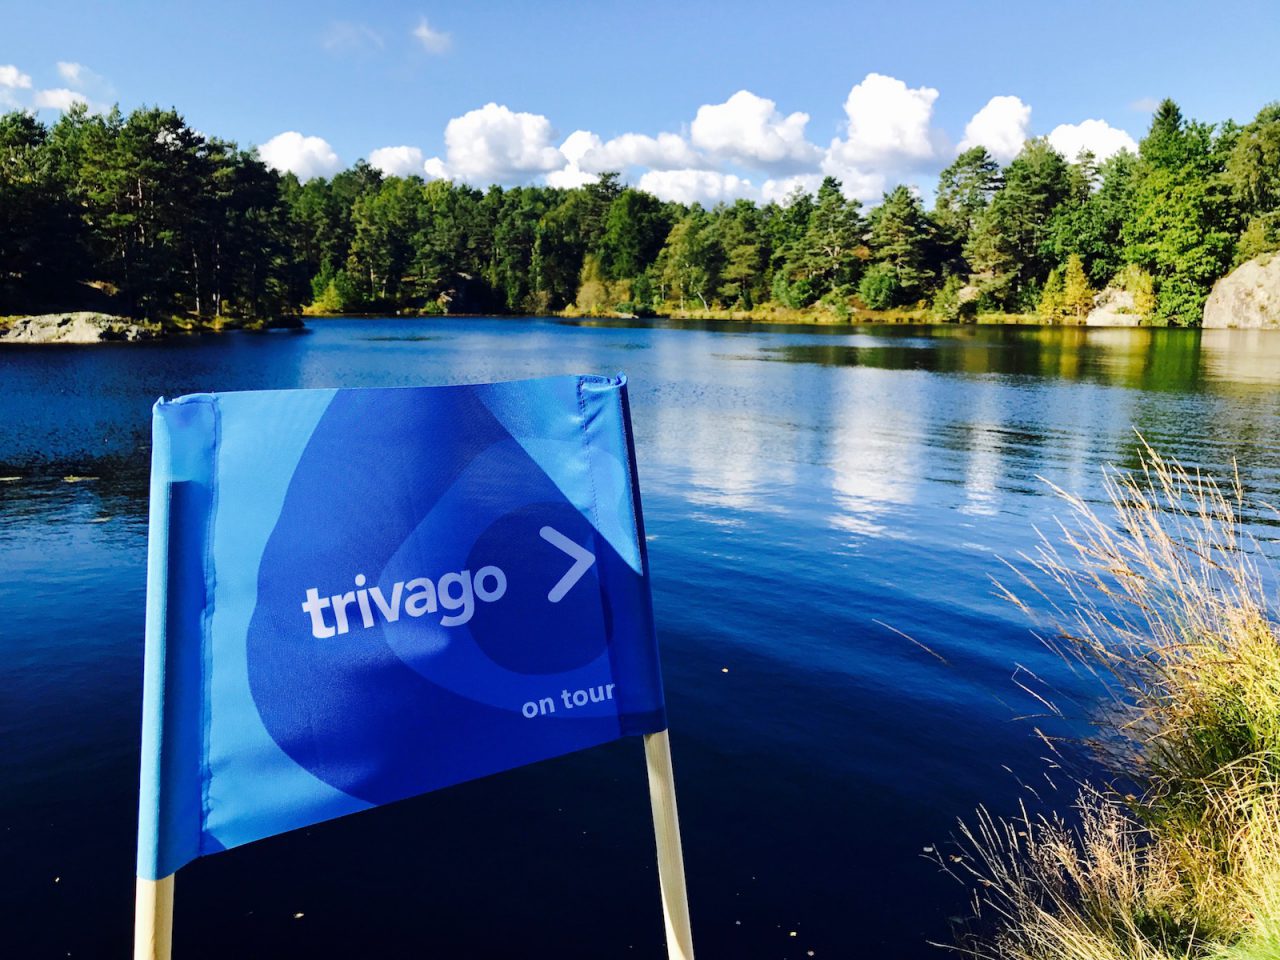 trivago on Tour - Cruise 2017 to Norway and Denmark